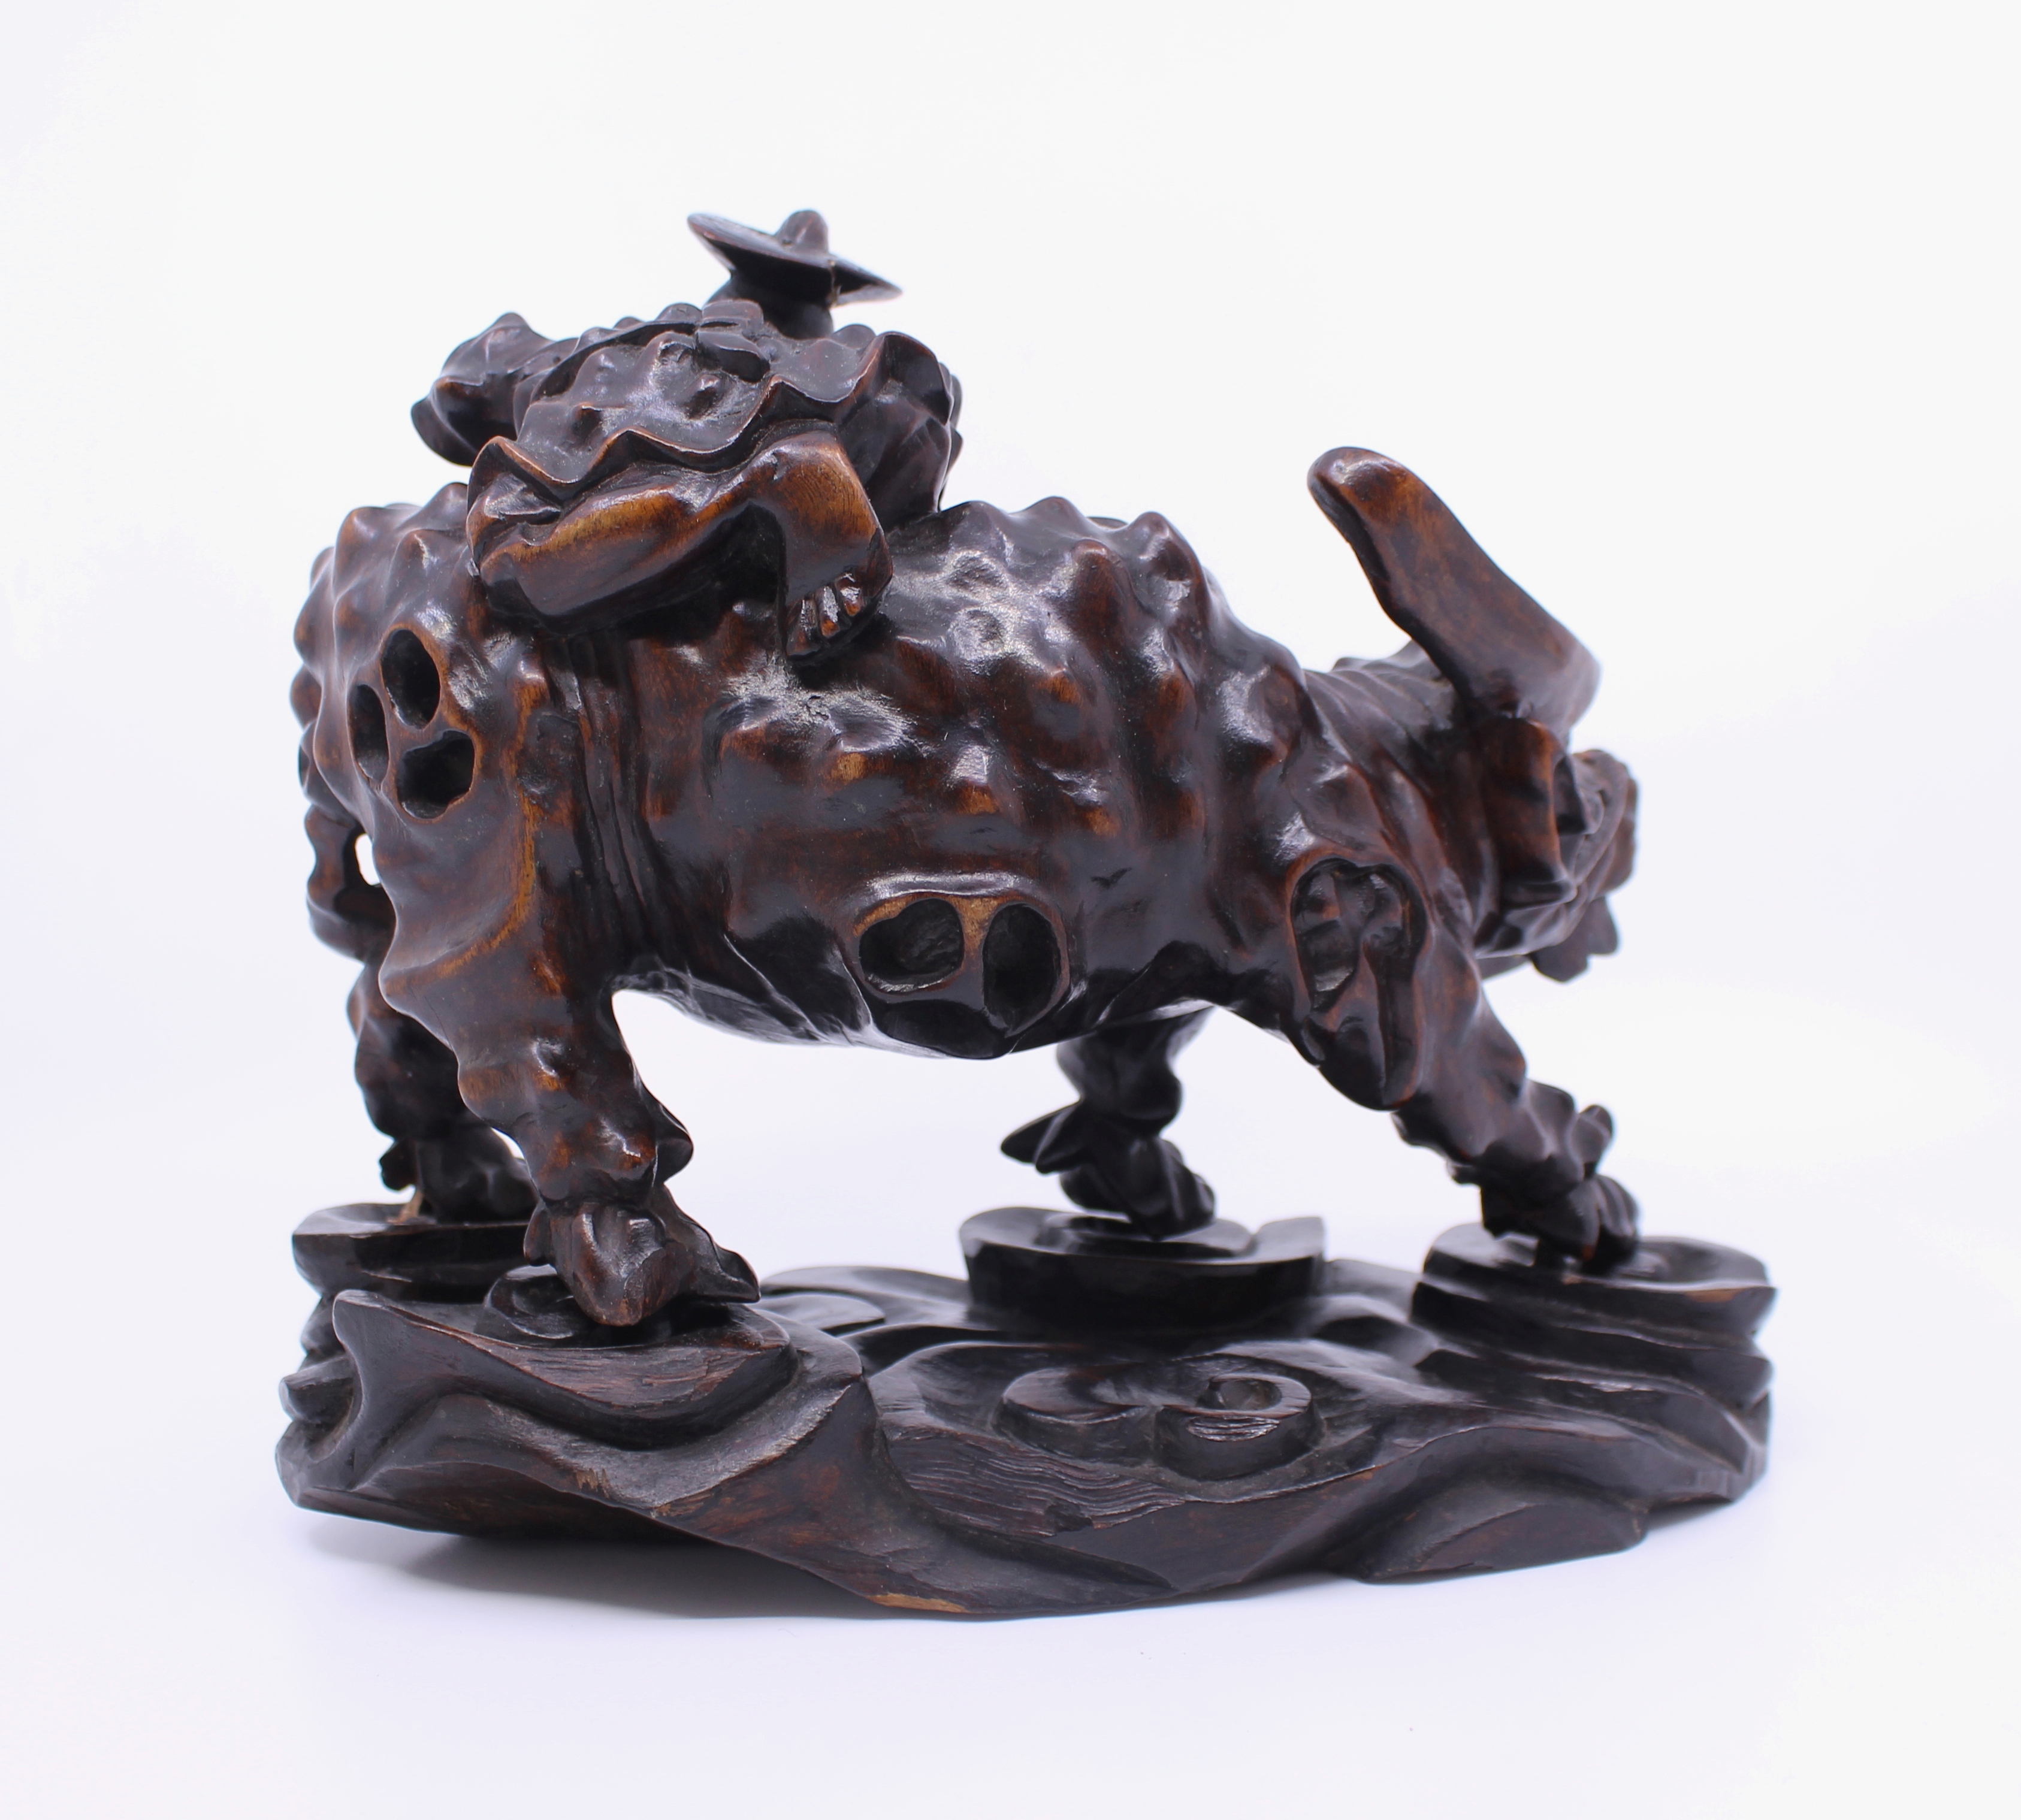 Chinese Carved Rootwood 19th c. Sculpture - Image 5 of 9